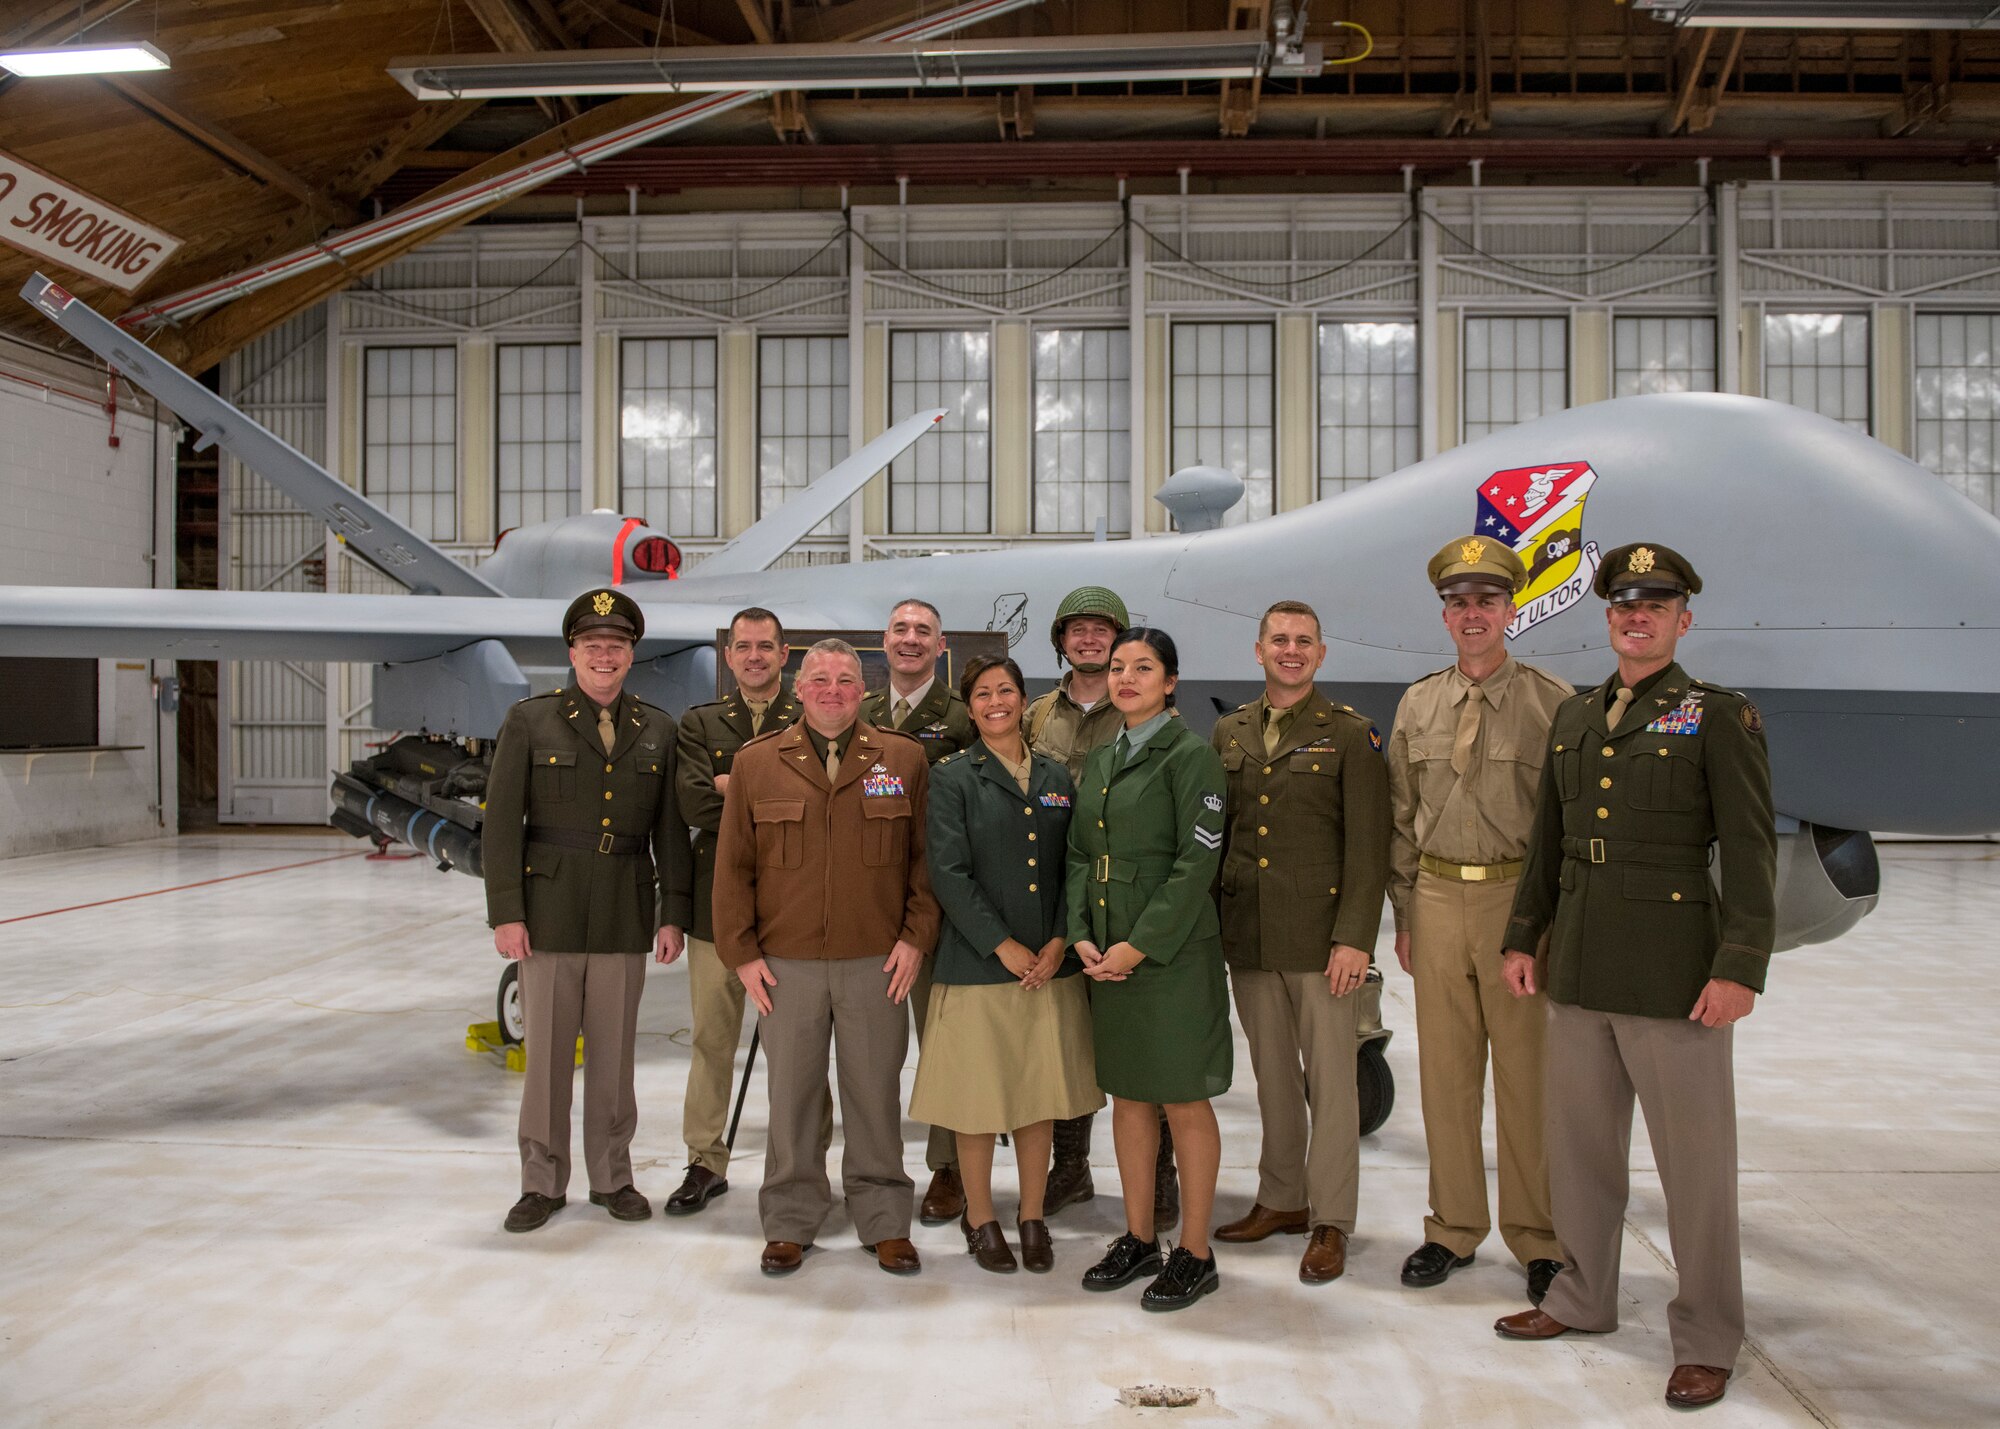 Airmen pose for a photo in front of a MQ-9 Reaper at the Air Force Ball, Sept. 14, 2019, on Holloman Air Force Base, N.M. This year’s ball was themed "The 49th Wing Returns Home" and Airmen were encouraged to dress in uniforms from the Army Air Corps. (U.S. Air Force photo by Airman 1st Class Kindra Stewart)